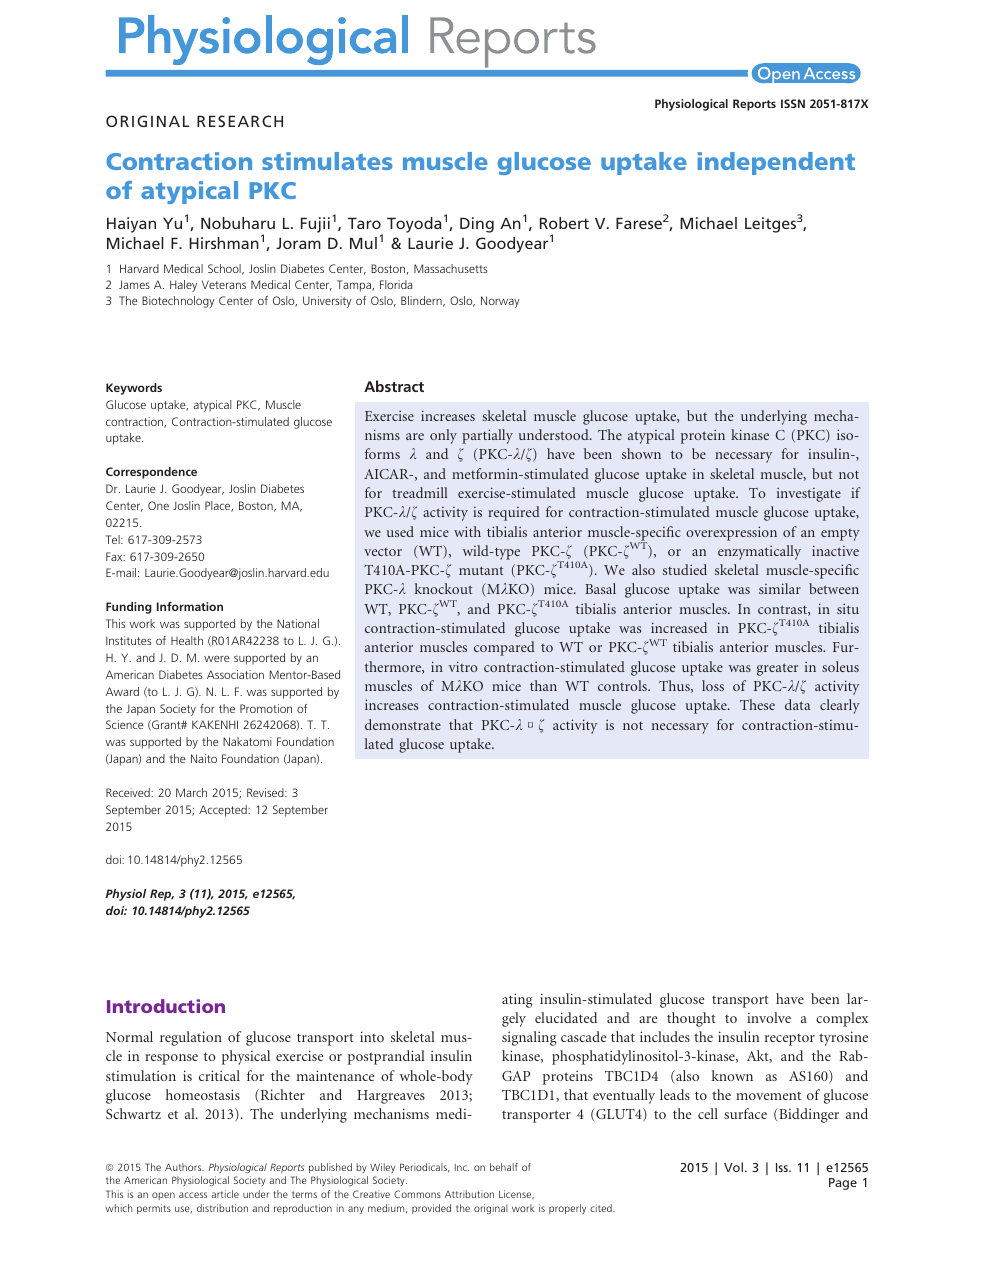 Contraction Stimulates Muscle Glucose Uptake Independent Of Atypical Pkc Topic Of Research Paper In Biological Sciences Download Scholarly Article Pdf And Read For Free On Cyberleninka Open Science Hub